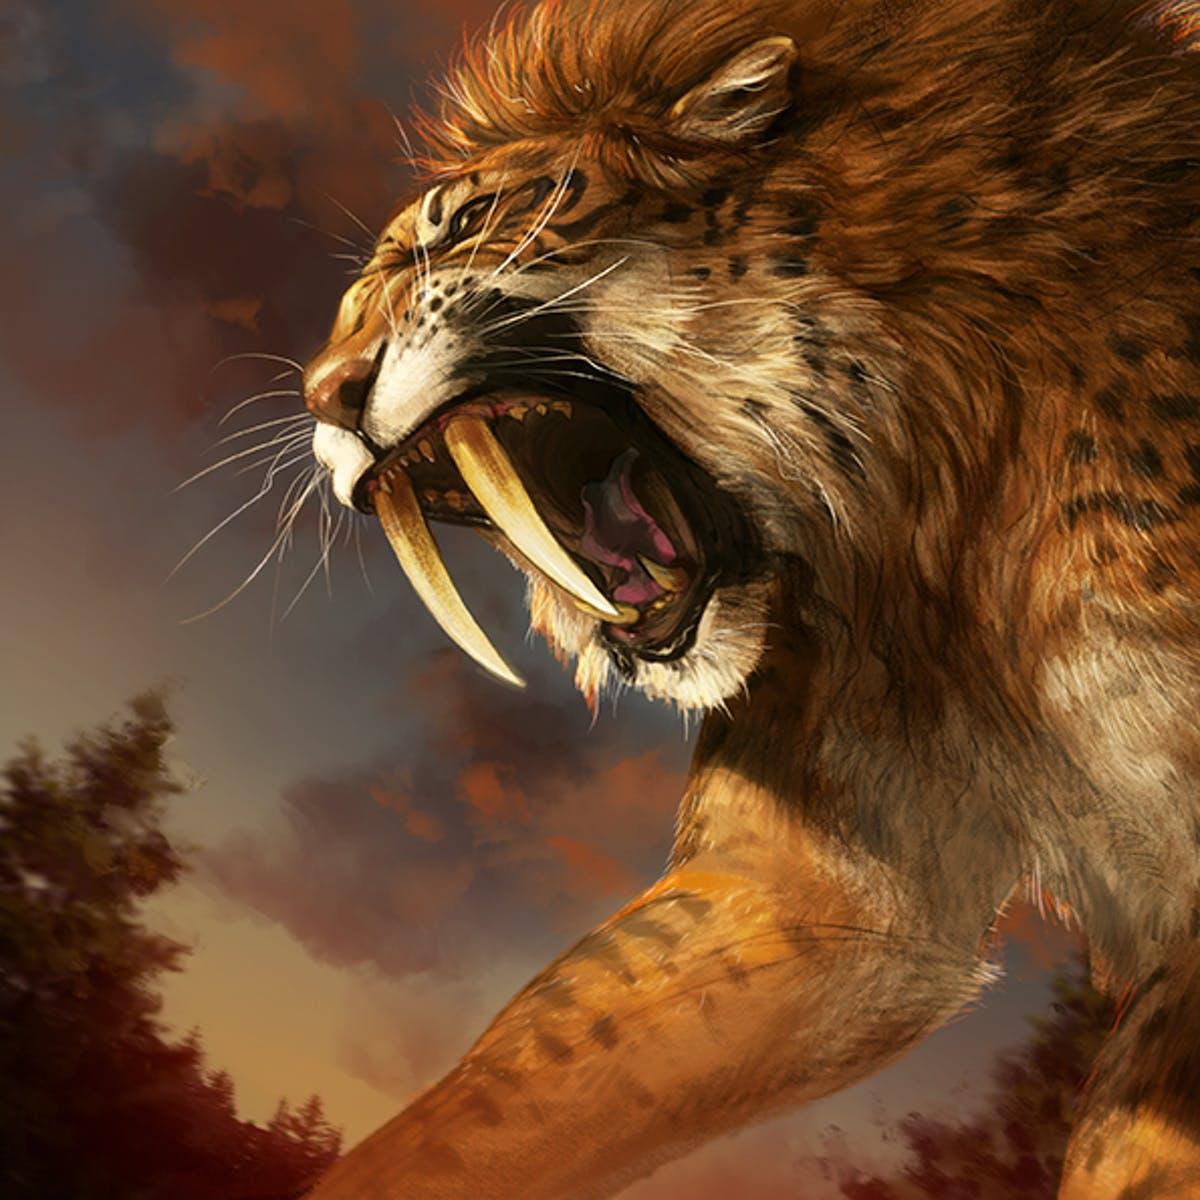 Ancient DNA Connects Saber Toothed Tigers And House Cats